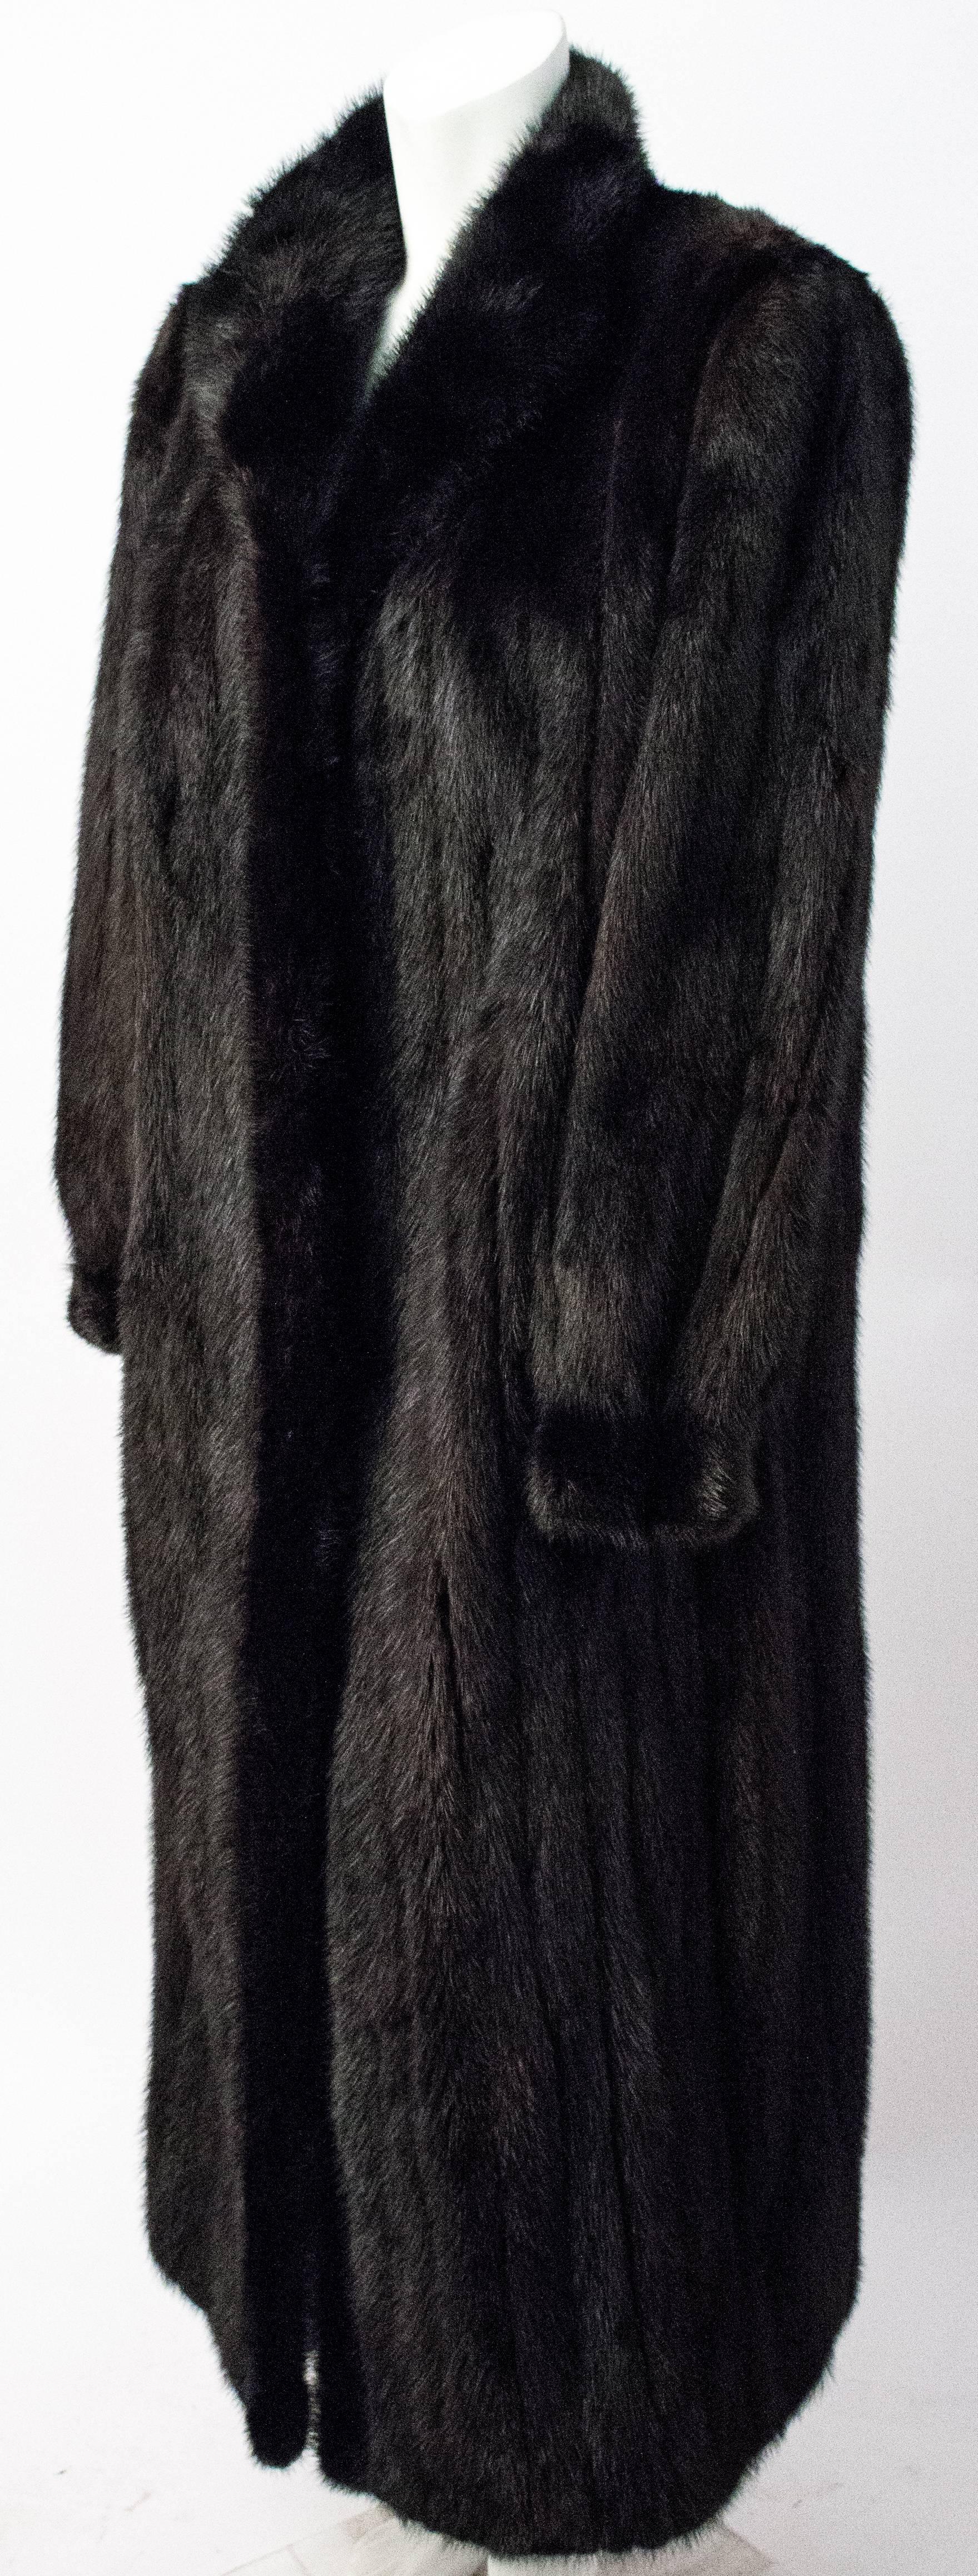 90s Exquisite Black Full Length Ranch Mink Coat. Marked size US women's 7, will fit anywhere between size 6-10. Two front pockets, lined in velvet. Front snap fur closures.